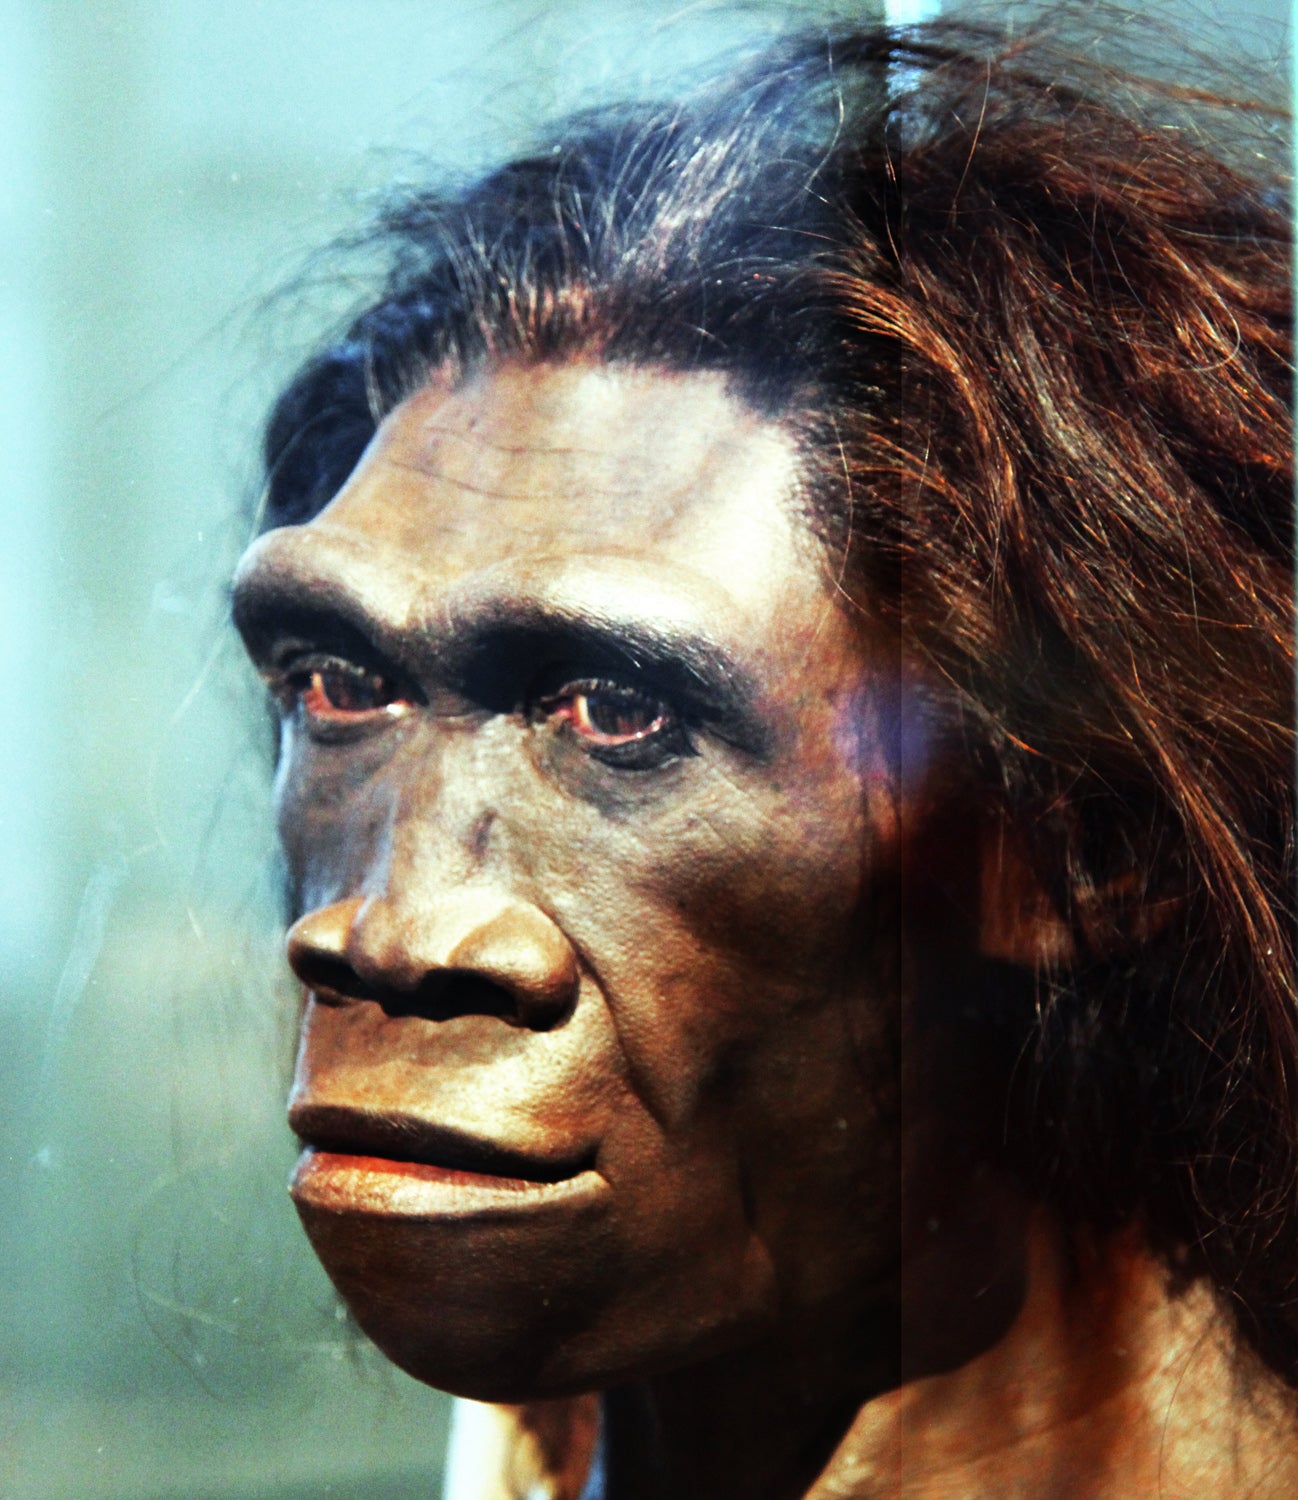 humans have been speaking for a lot longer than we originally thought